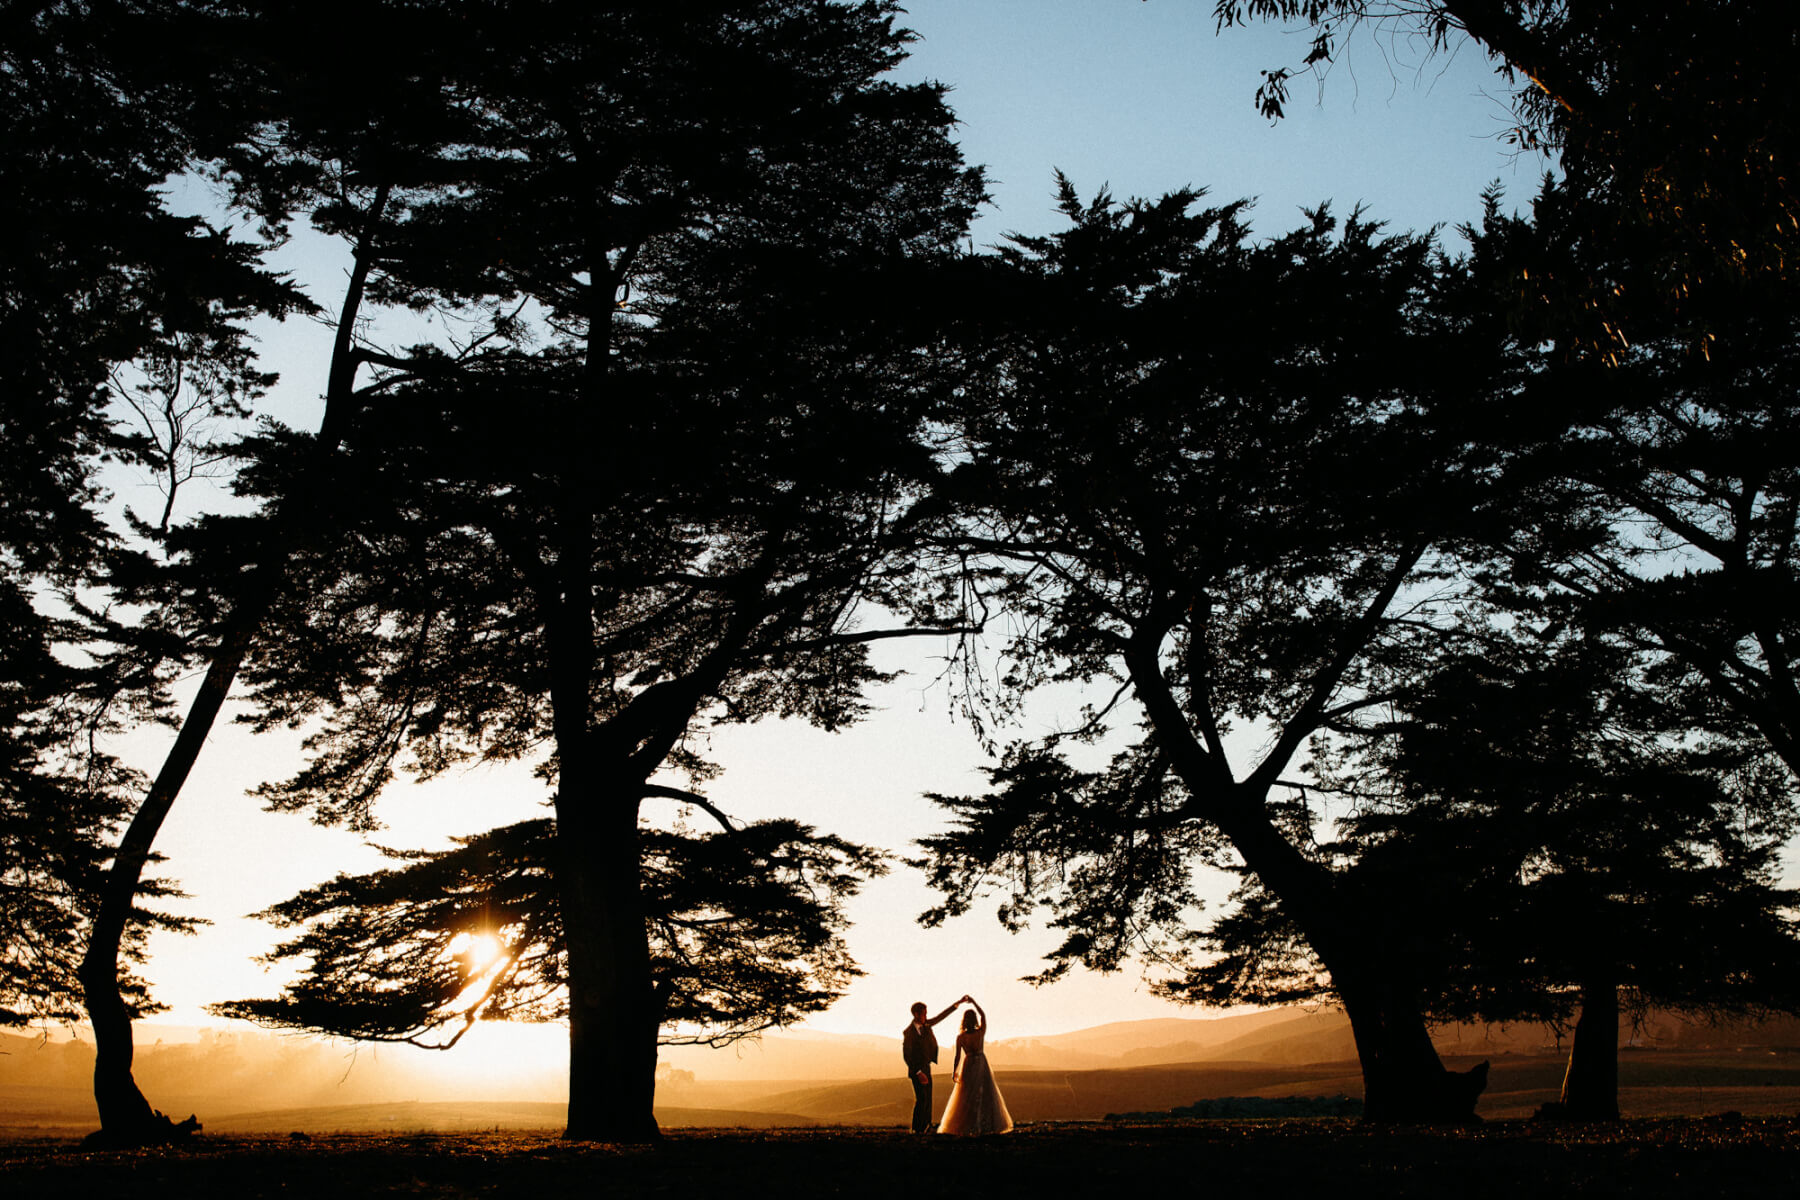 Groom twirling bride between towering trees under the Marin County sunset